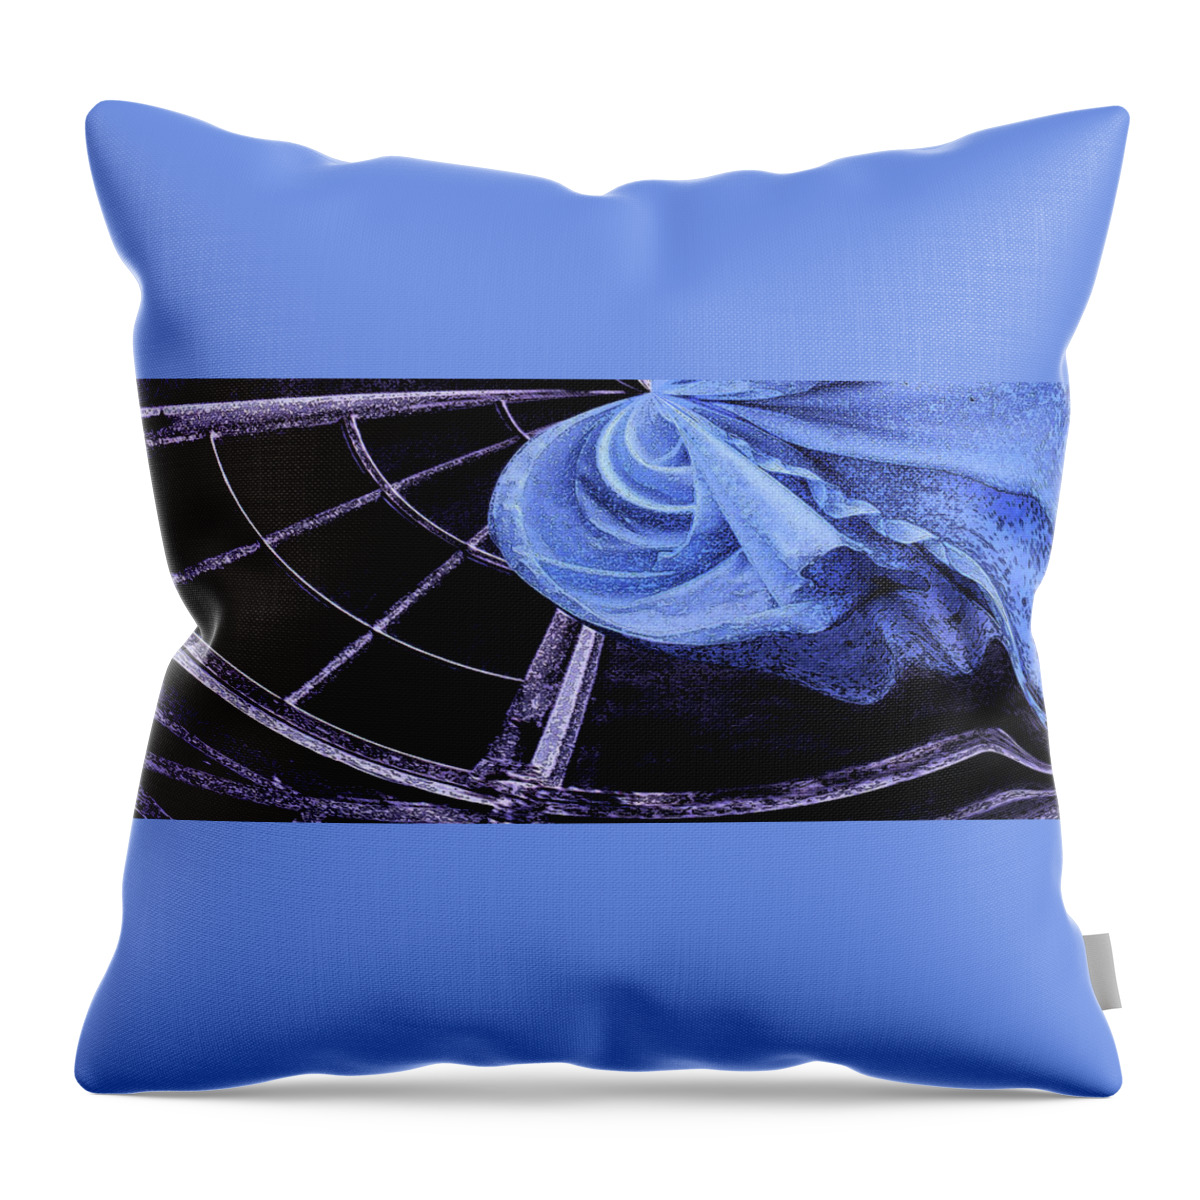 Curtain Throw Pillow featuring the photograph Wind in the Curtains by Wayne King